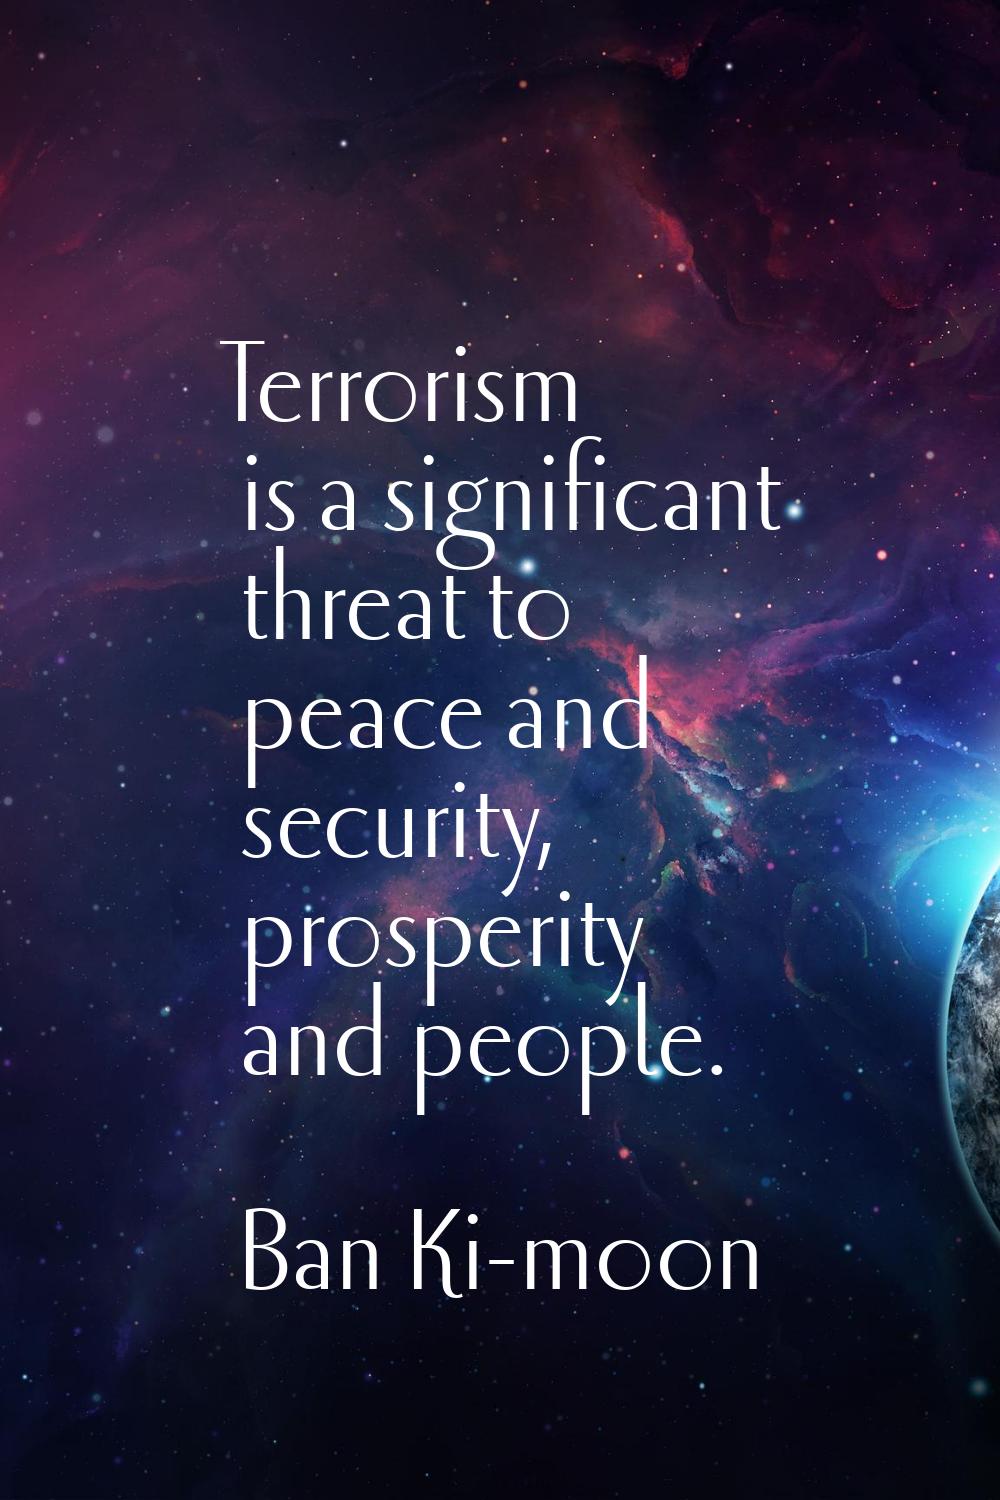 Terrorism is a significant threat to peace and security, prosperity and people.